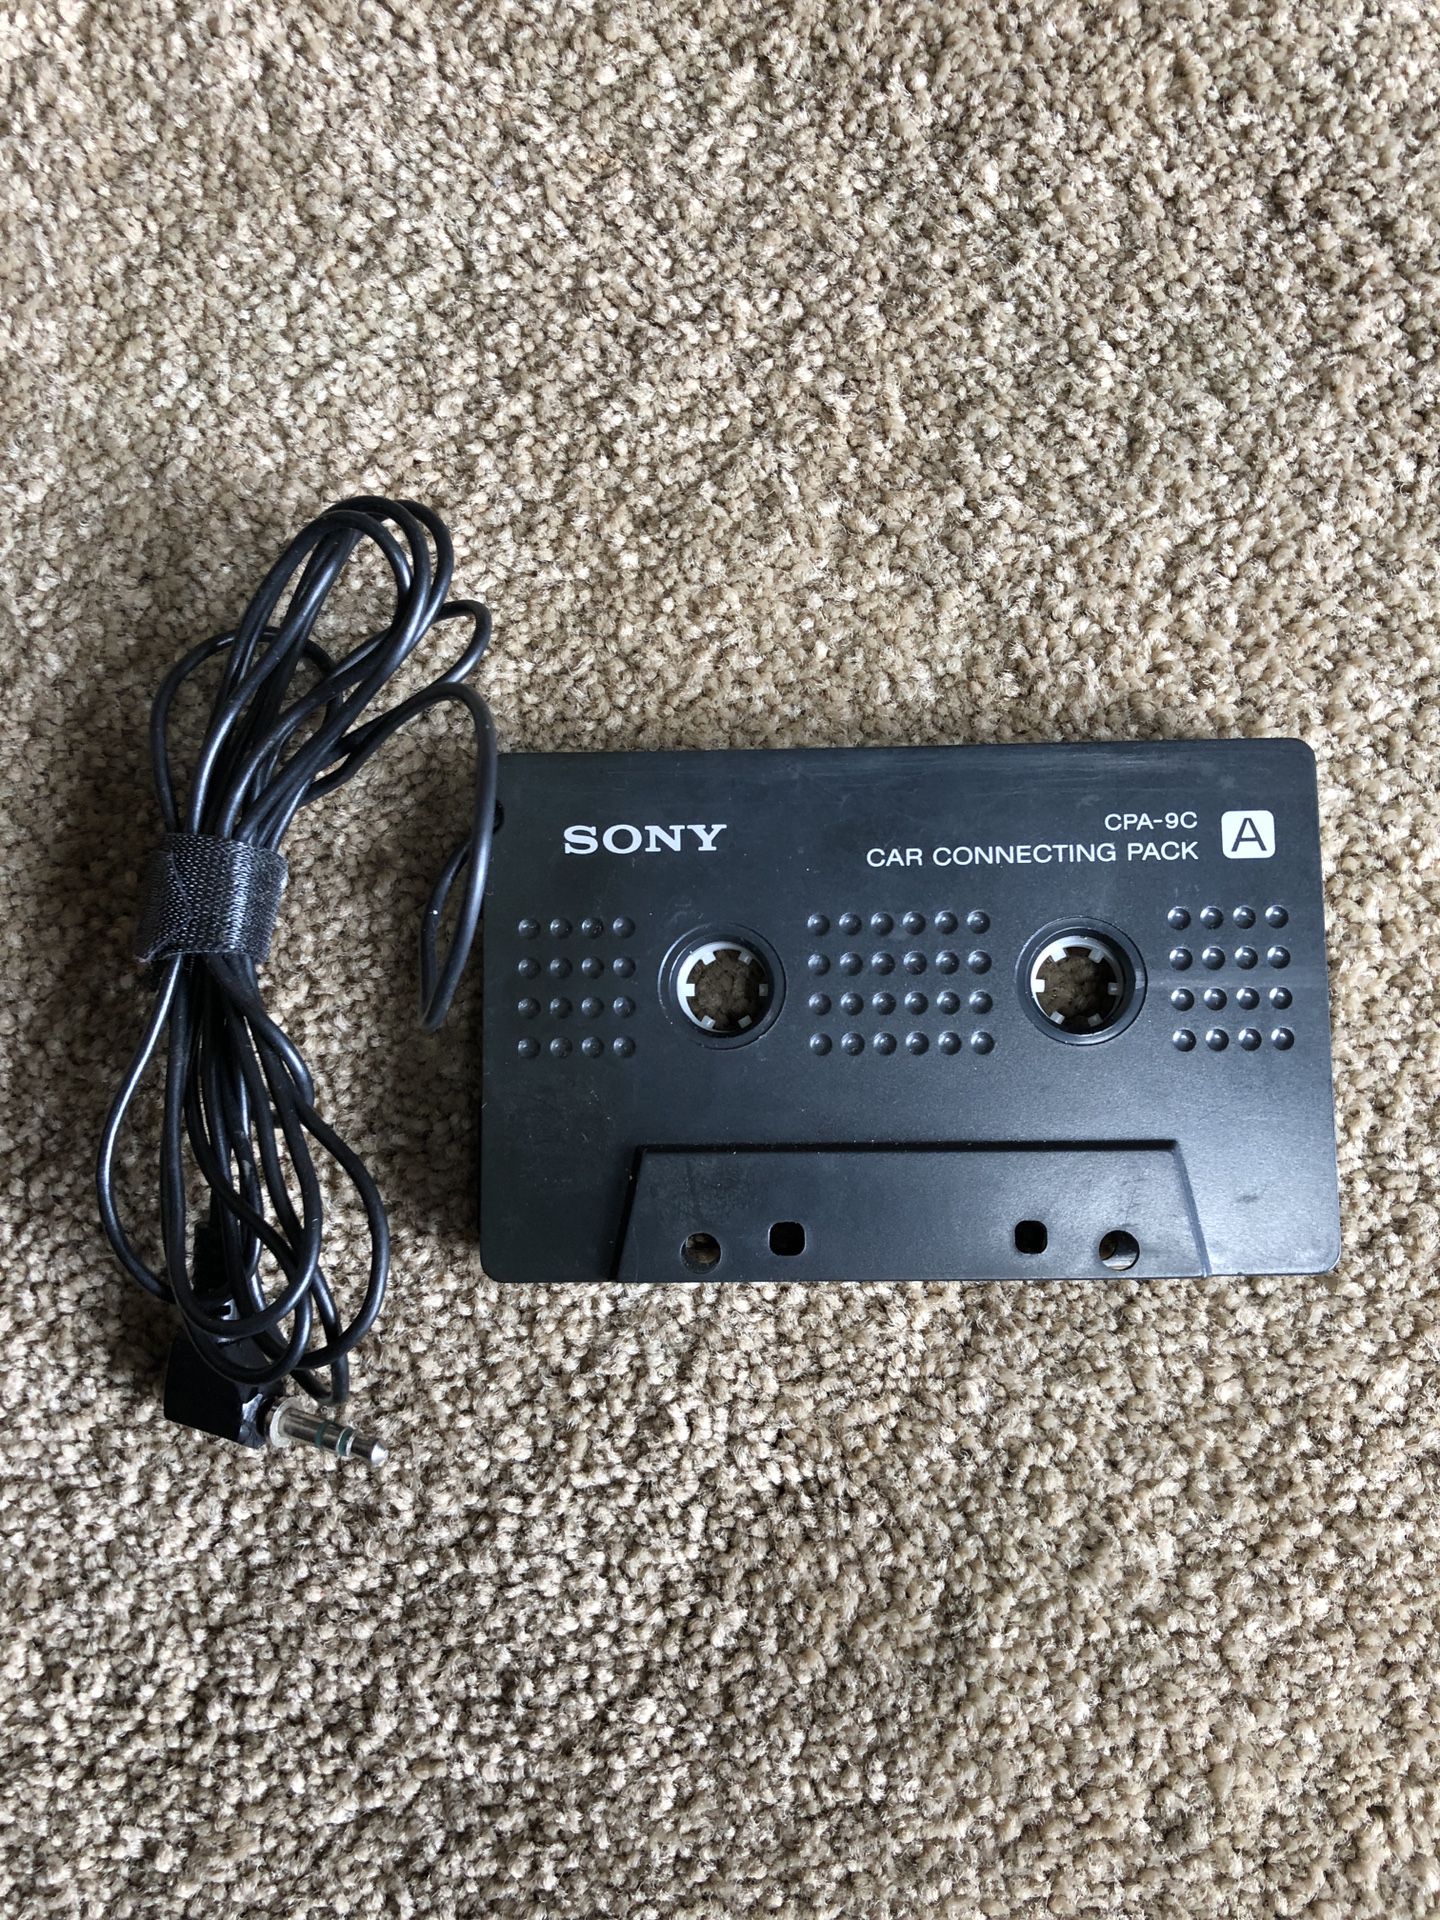 Sony Cassette Adapter / CPA-9C / Car Connecting Pack / Headphone Jack Adapter.